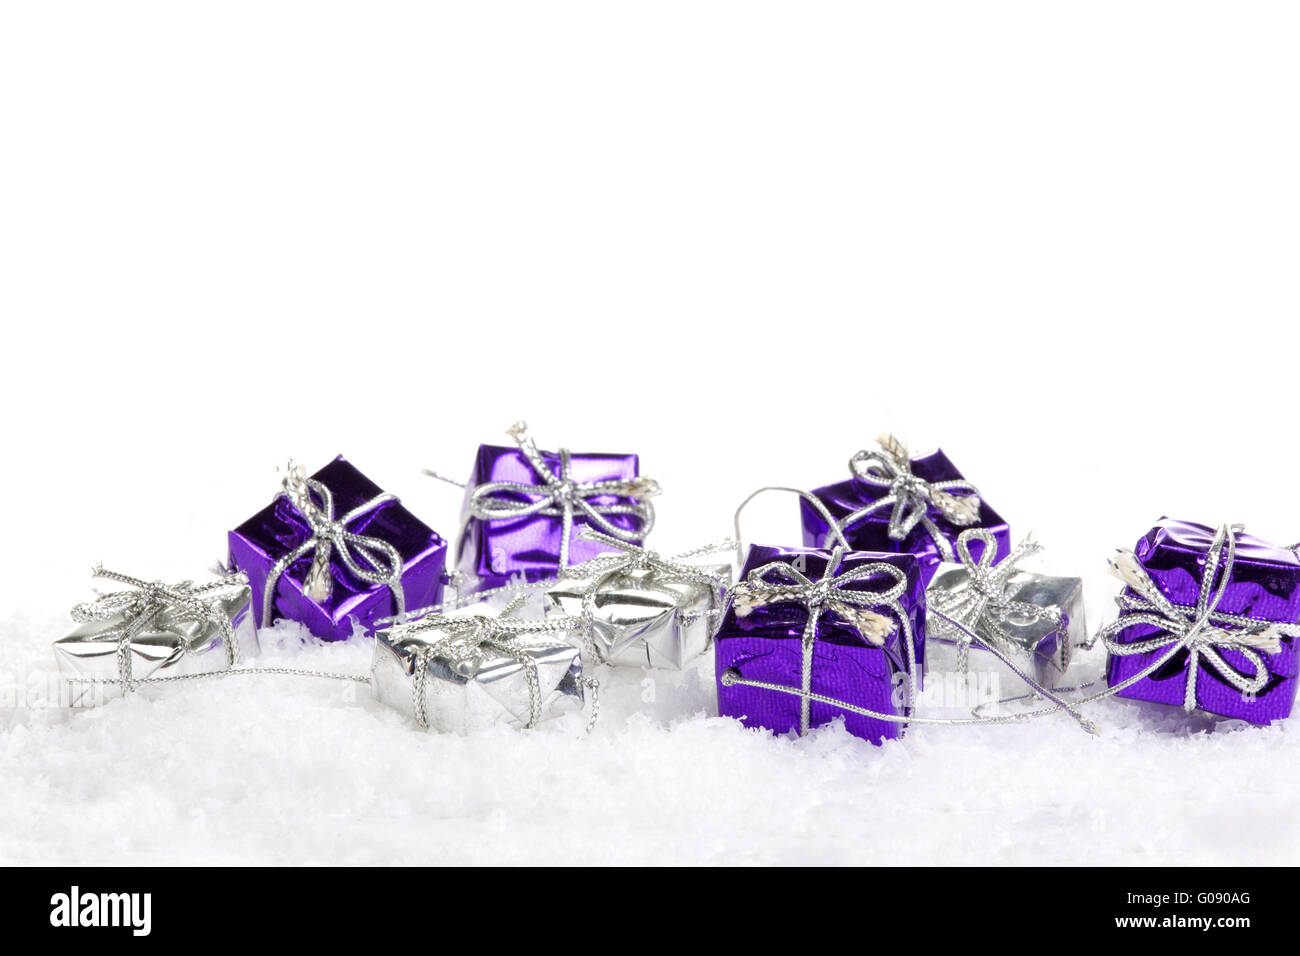 Presents purple and silver on artificial snow Stock Photo